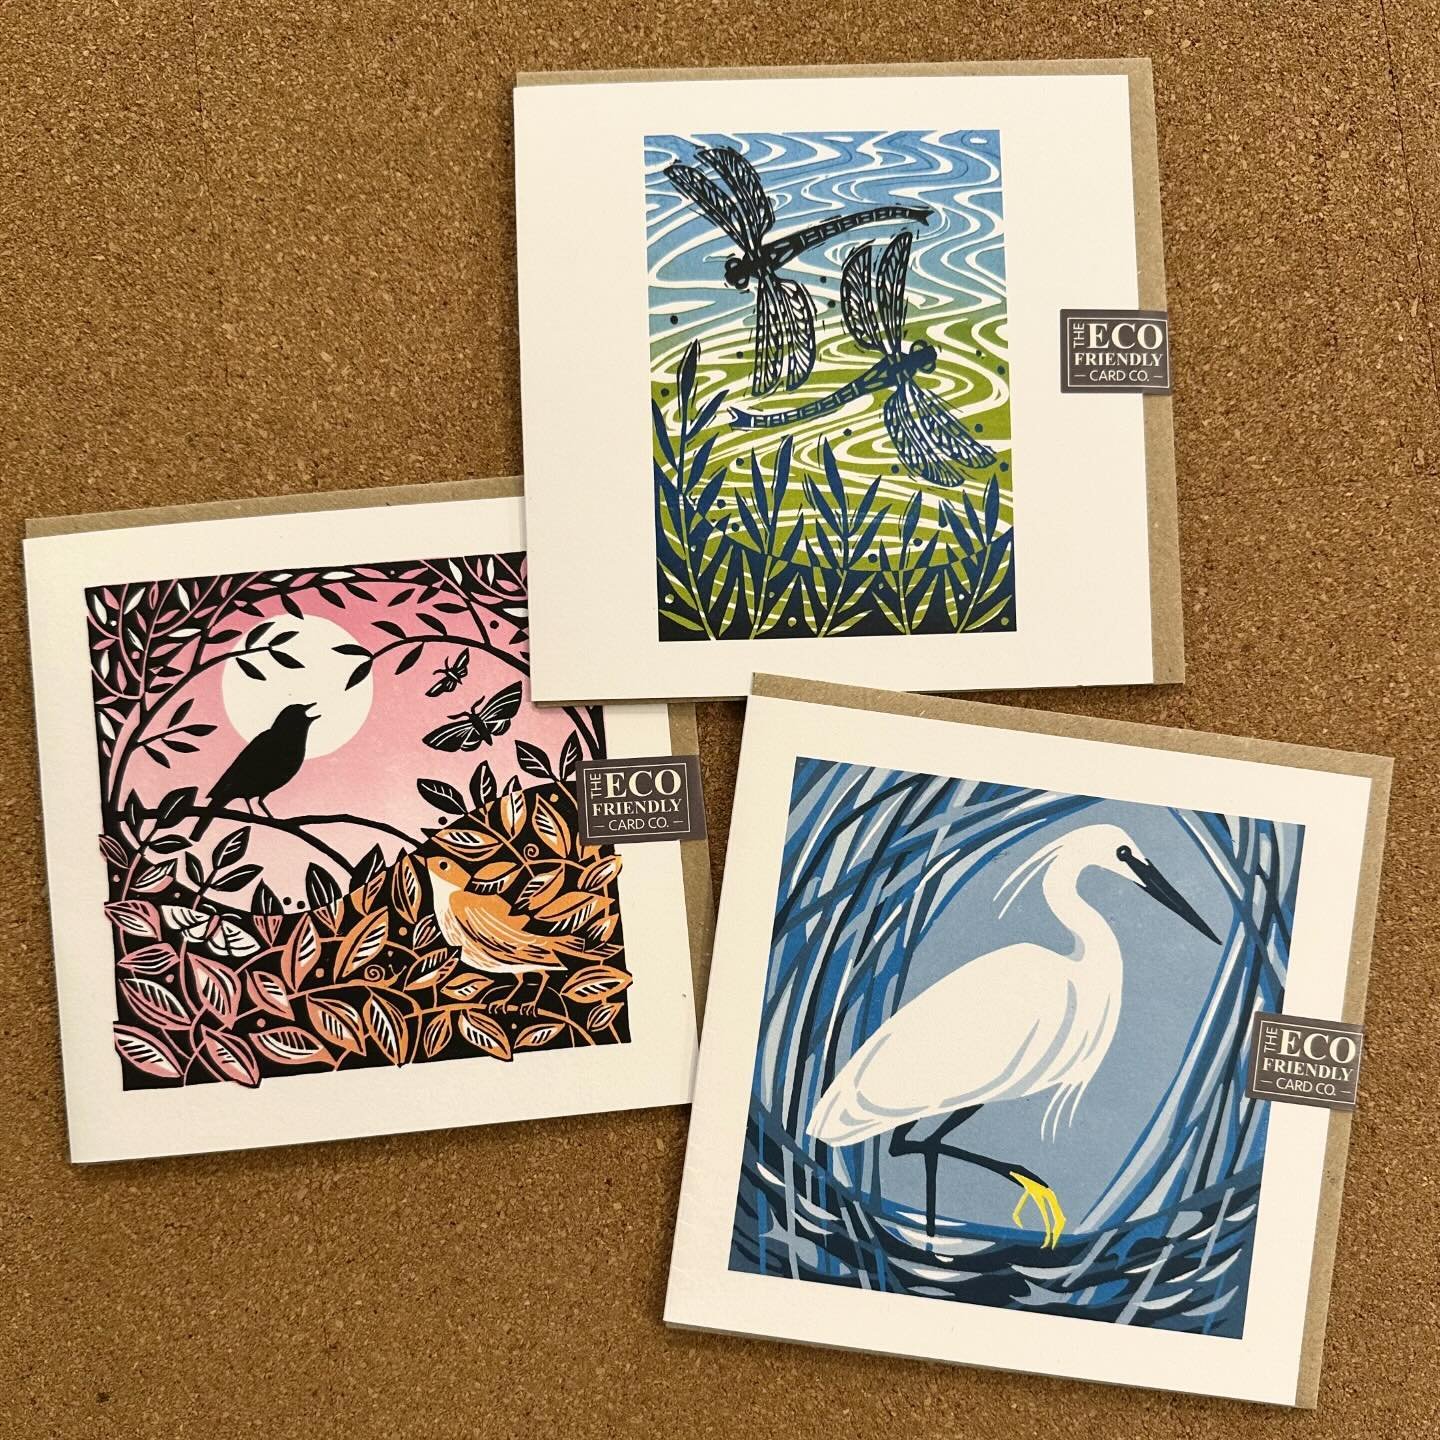 Restocked the greetings cards in the gallery, including these fantastic 3 new designs from @manda.beeching !!